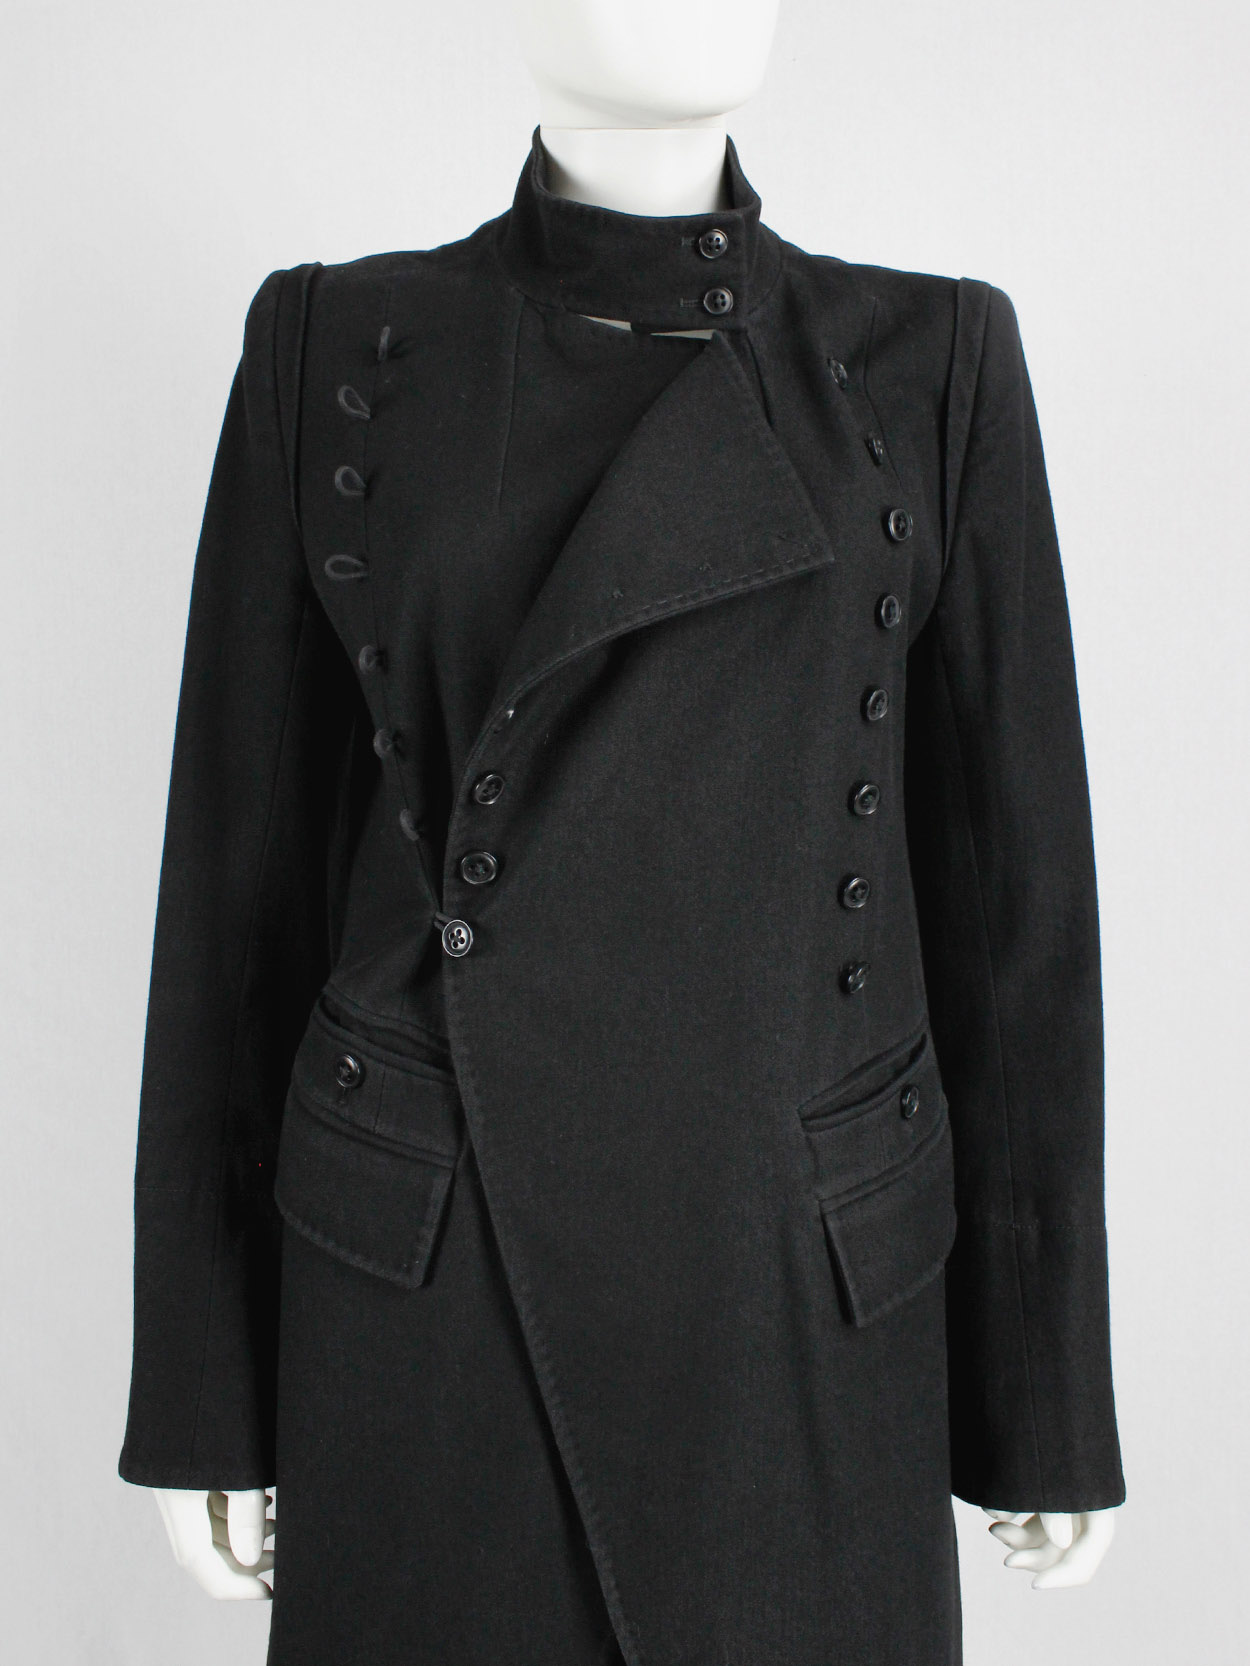 Ann Demeulemeester black double breasted military coat fall 2005 (3)